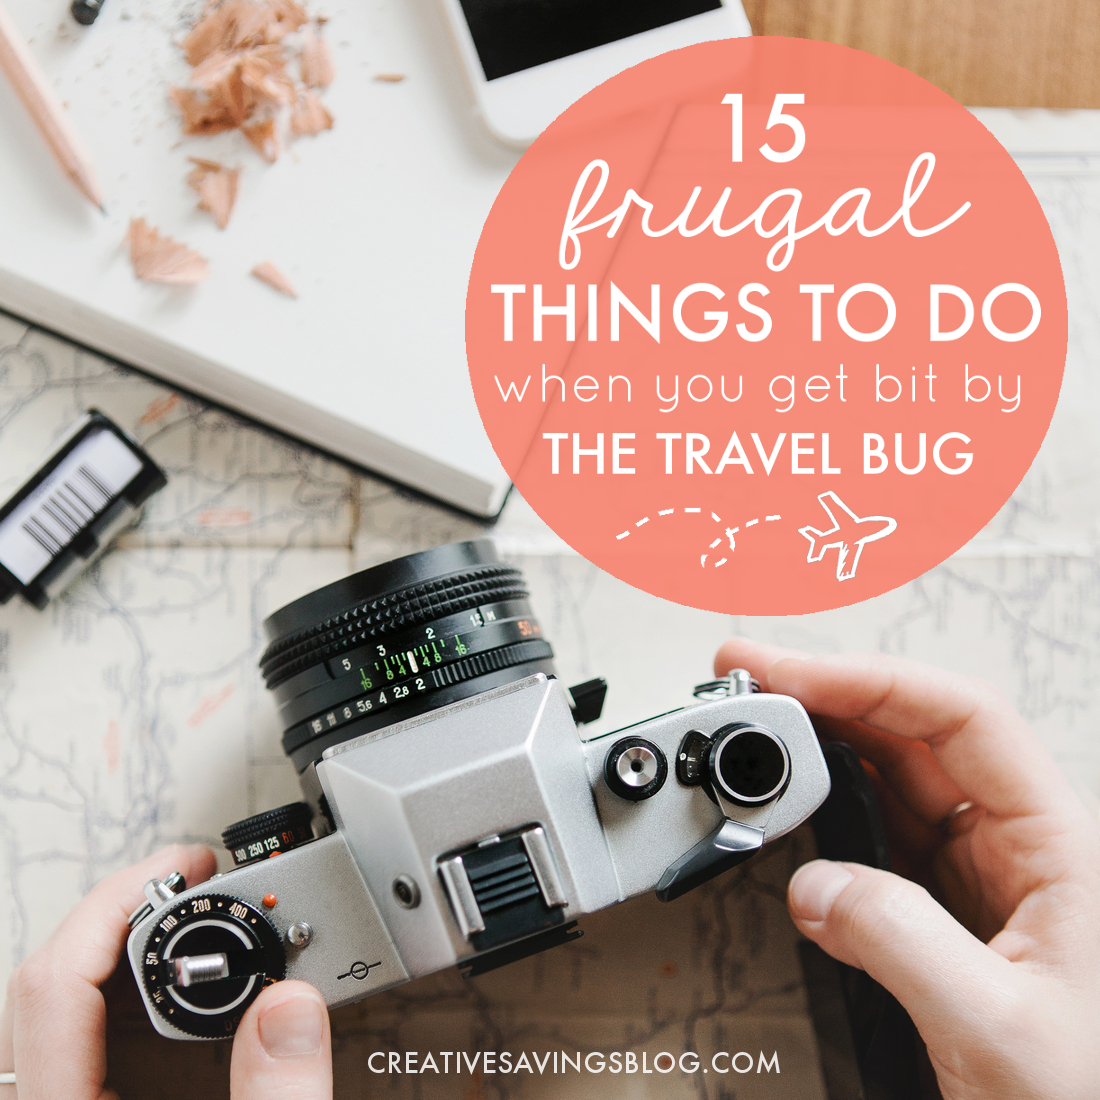 15 Frugal Things to Do When You Get Bit By the Travel Bug